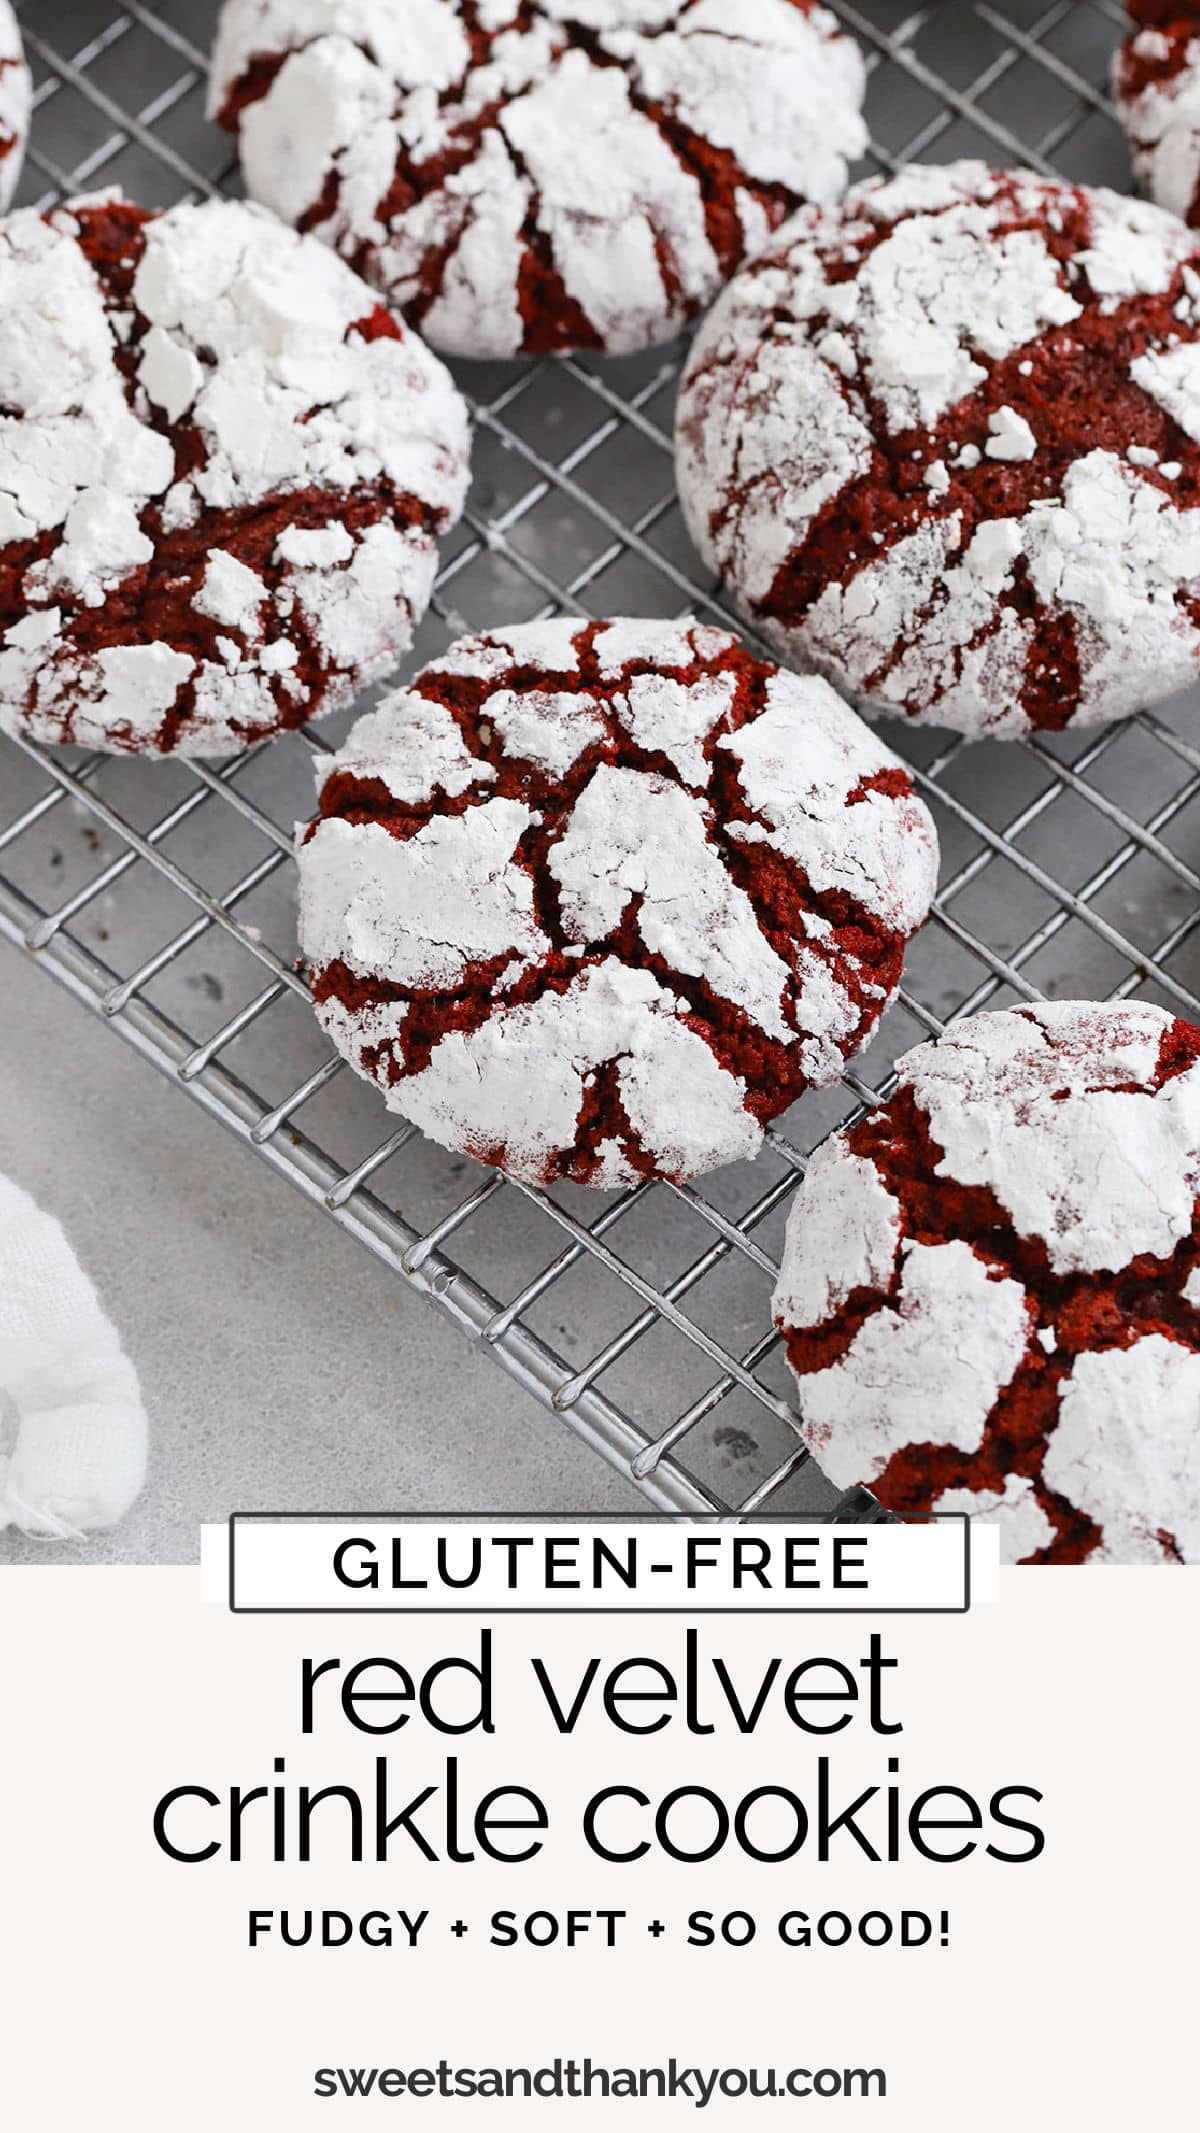 Our Gluten-Free Red Velvet Crinkle Cookies recipe is as yummy as it looks! Fudgy red velvet cookies rolled in powdered sugar for a pretty crackle effect. / gluten-free red velvet crinkles / gluten-free red velvet cookie recipe / gluten-free cookies / gluten free crinkle cookies / gluten free valentines cookies / gluten free holiday cookies / gluten-free christmas cookies / gluten-free cookie recipe